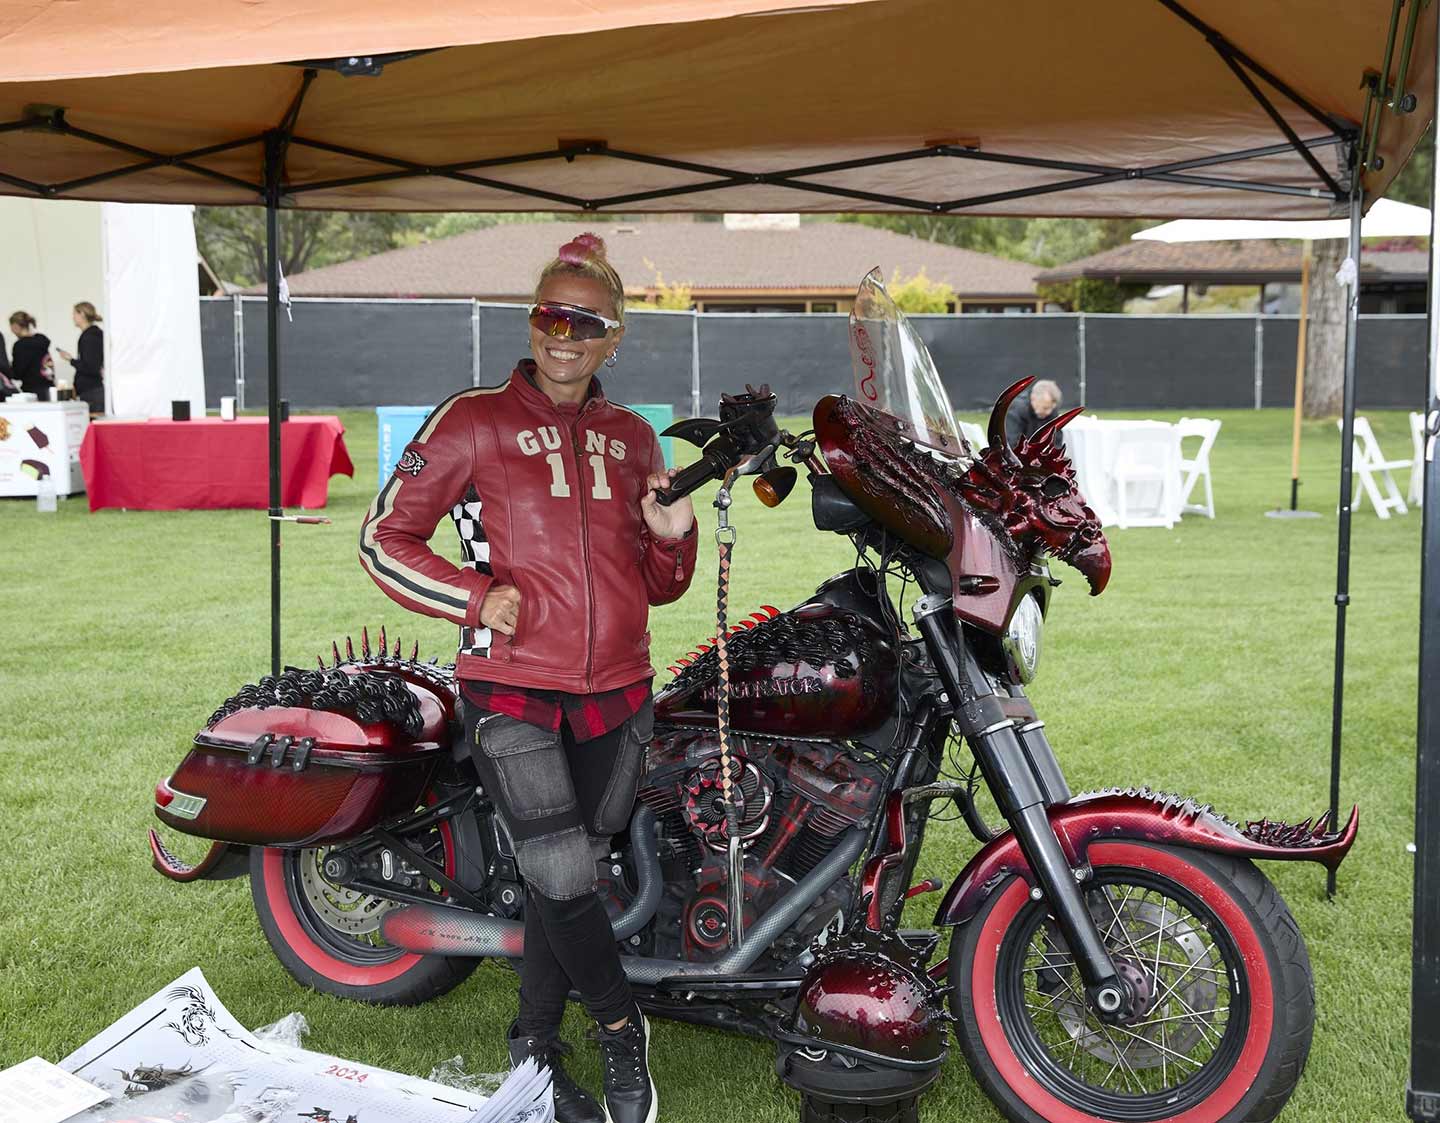 Lily Key showed up with her fiberglass-modified Harley Softail called “Dragonator.”